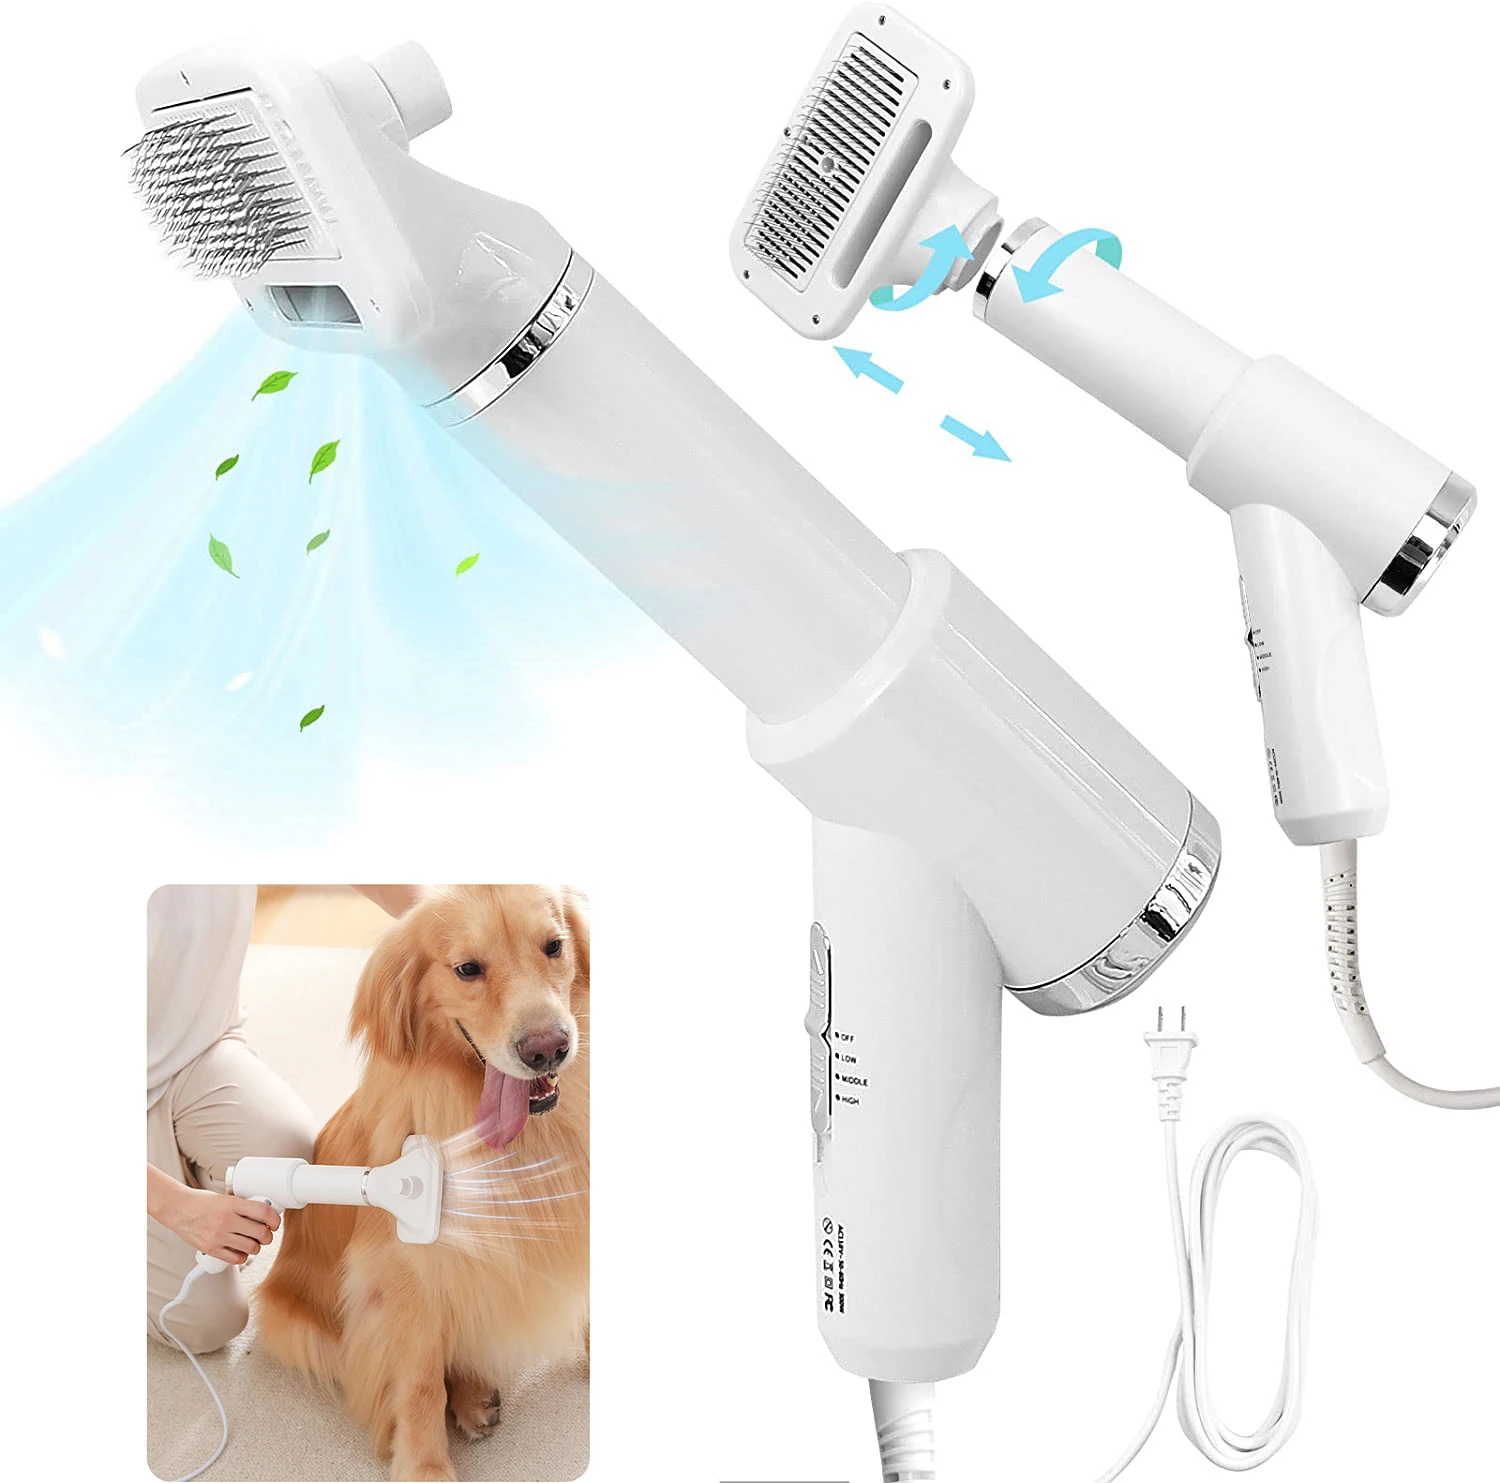 

Dog Hair Dryer Brush Pet Grooming Hair Dryer with Slicker Brush One-Key Hair Removal Dog Blow Dryer for Small Medium Dogs Cats